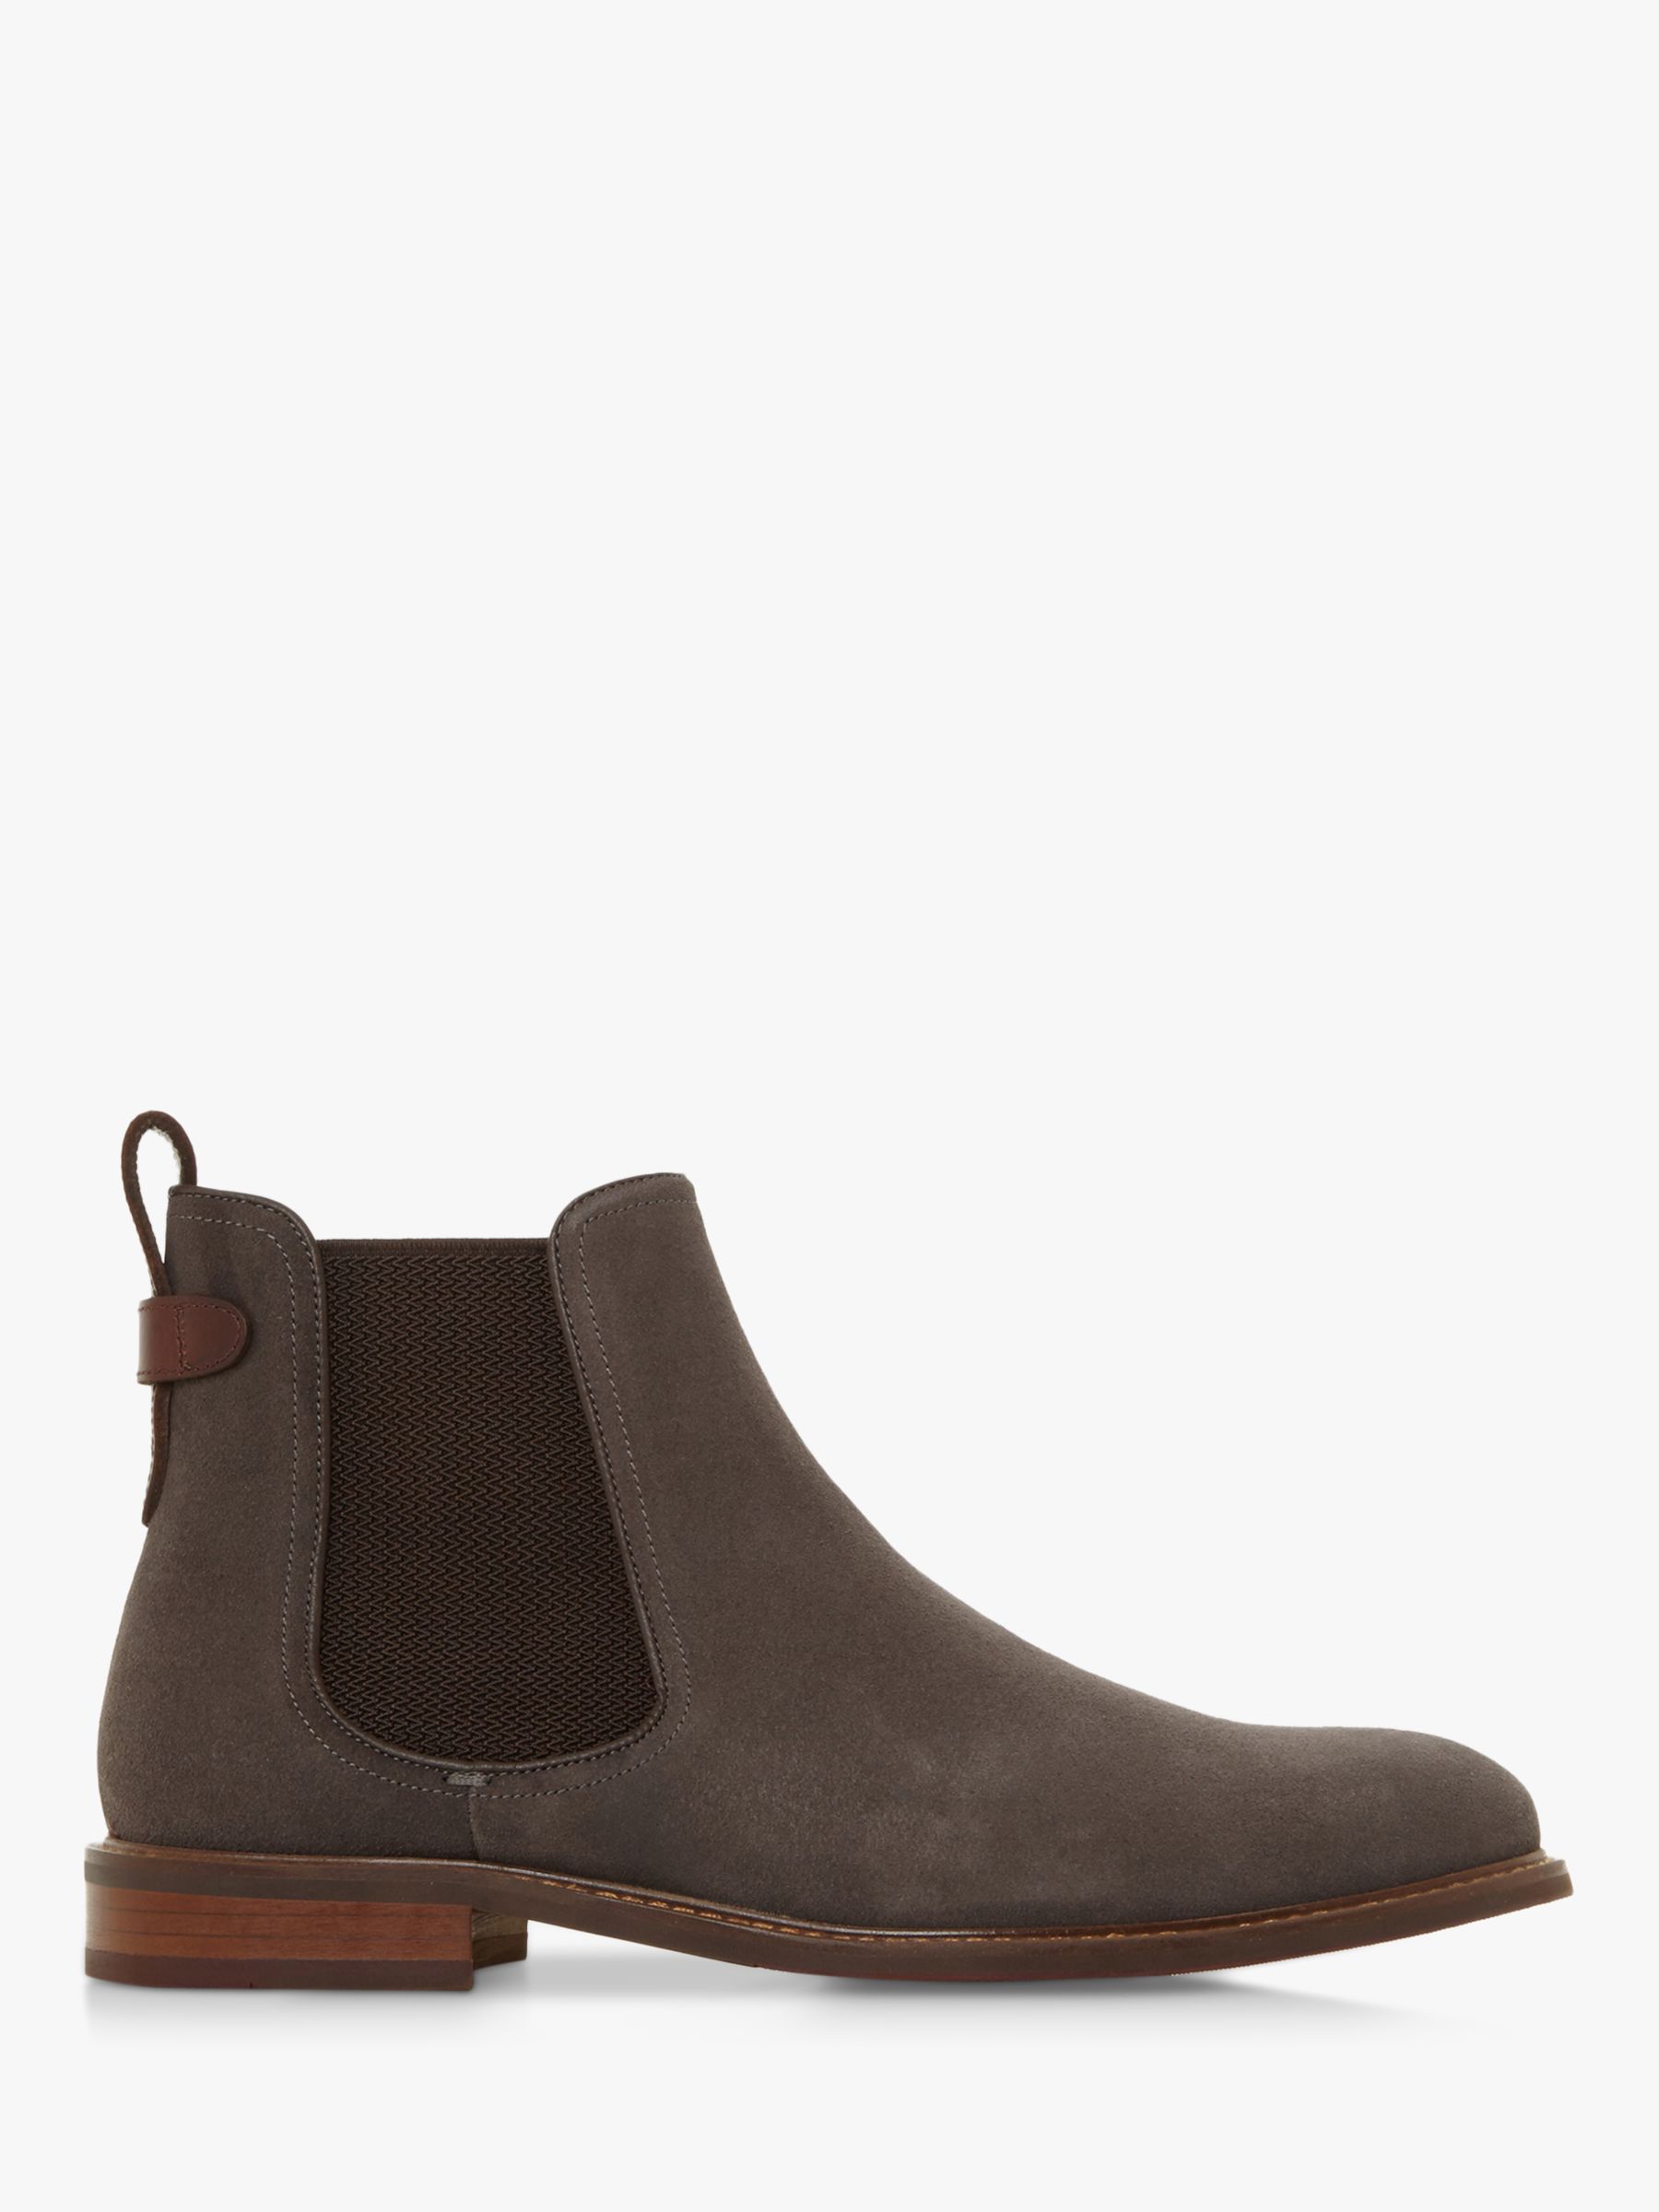 Dune Character Suede Chelsea Boots, Grey at John Lewis & Partners